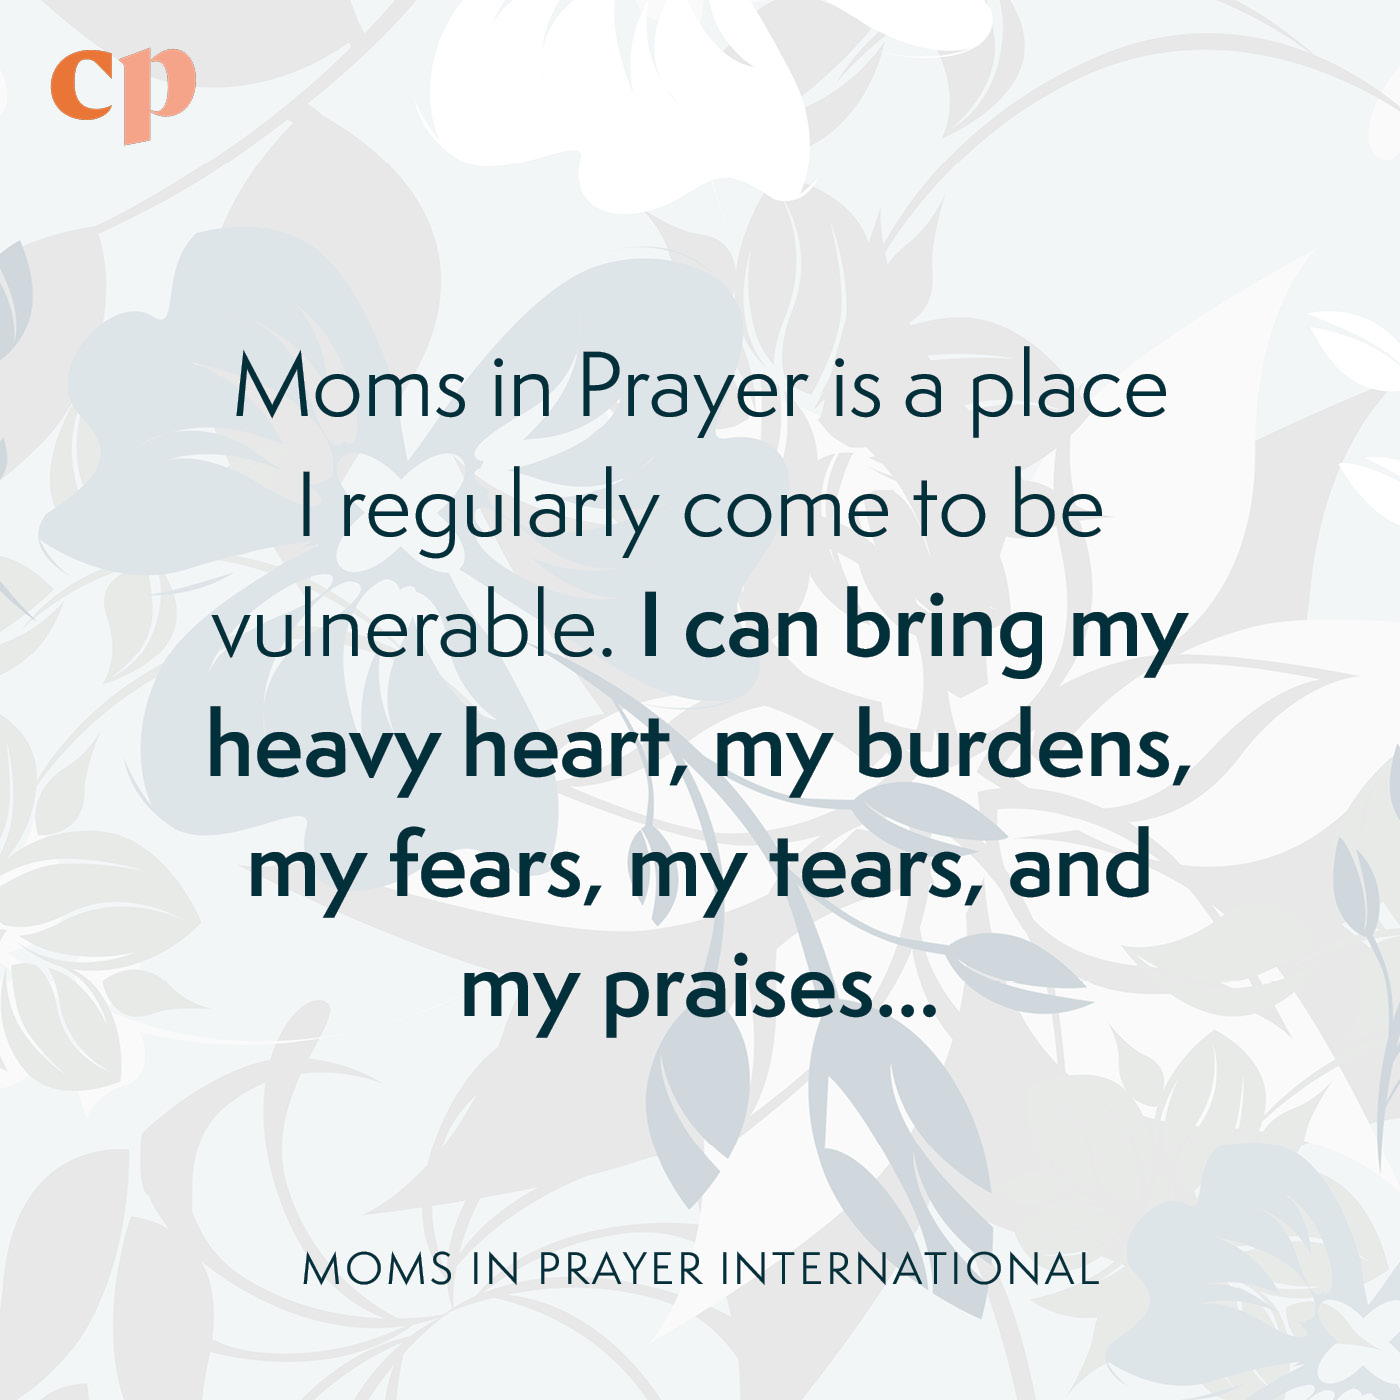 how to start a moms prayer group